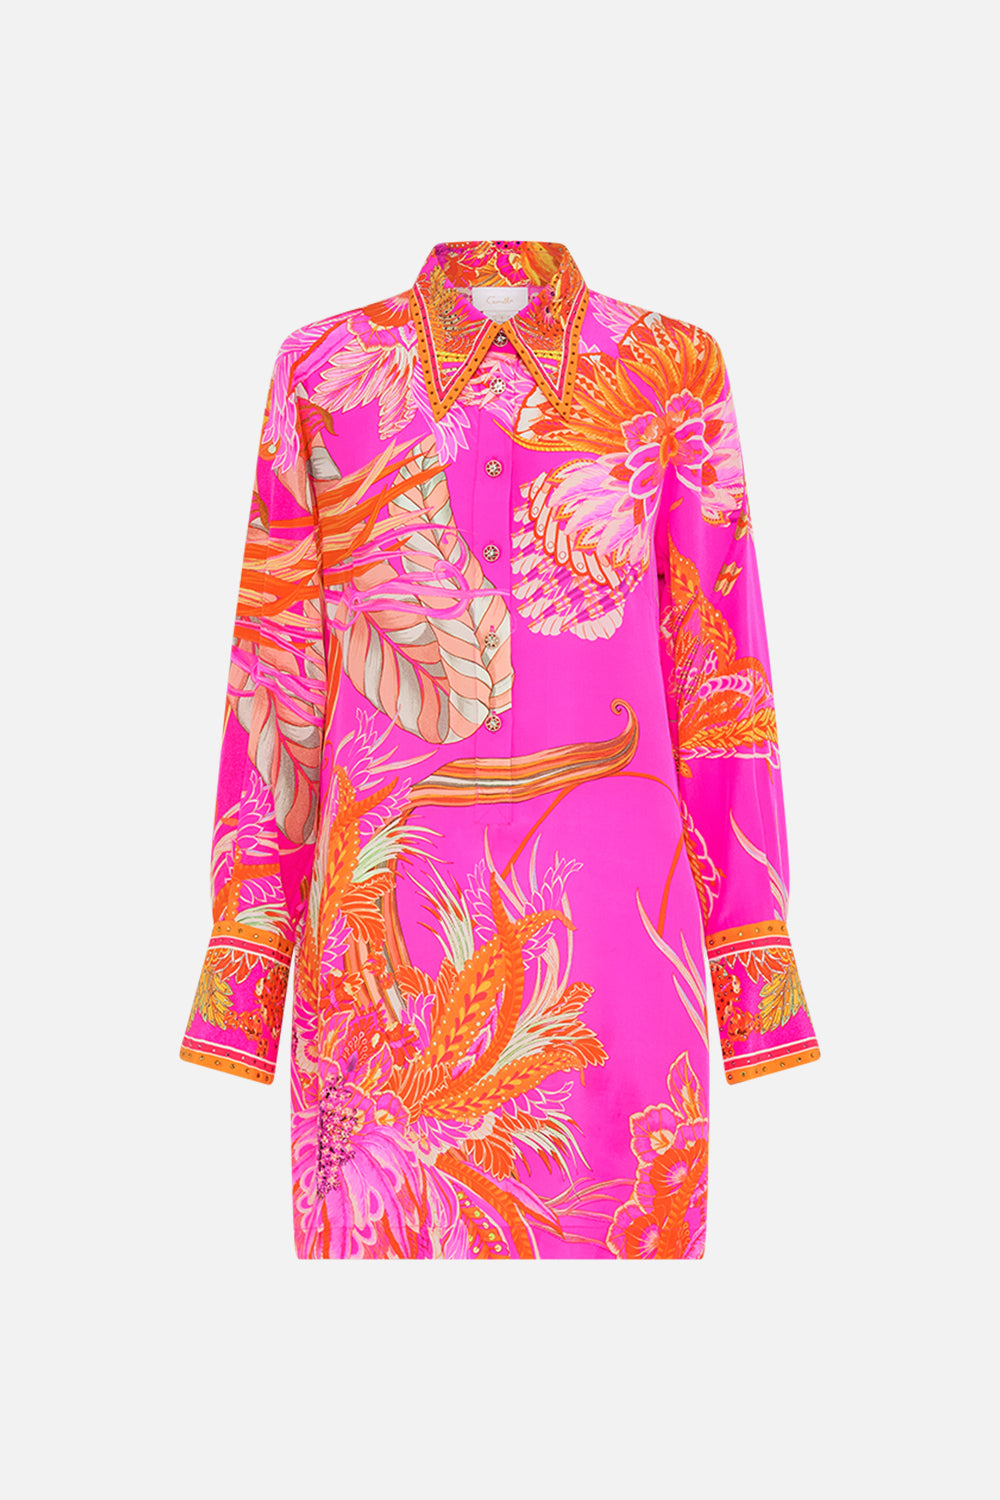 Product view of CAMILLA silk shirt dress in A Heart That Flutters print